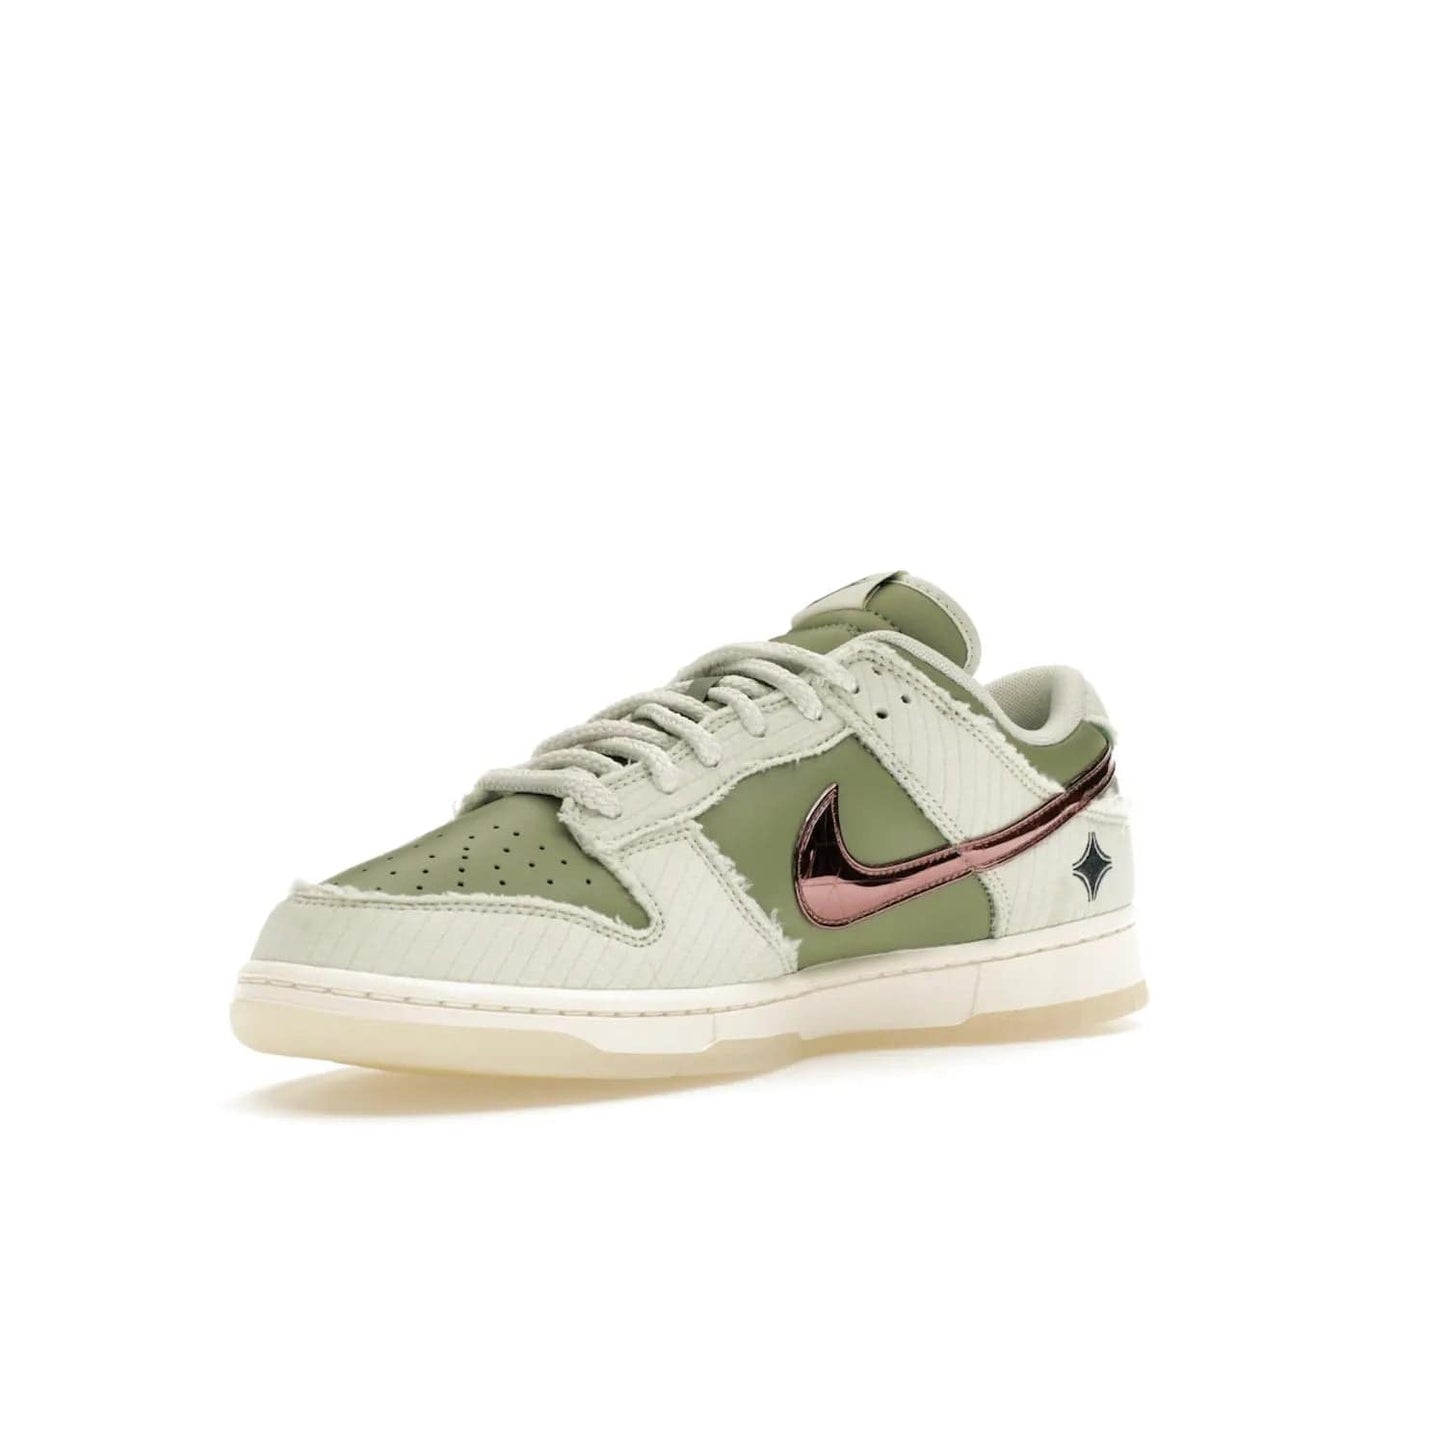 Nike Dunk Low Retro PRM Kyler Murray Be 1 of One - Image 15 - Only at www.BallersClubKickz.com - Introducing the Nike Dunk Low Retro PRM Kyler Murray "Be 1 of One"! A Sea Glass upper with Sail and Oil Green accents, finished with Rose Gold accents. Drop date: November 10th.